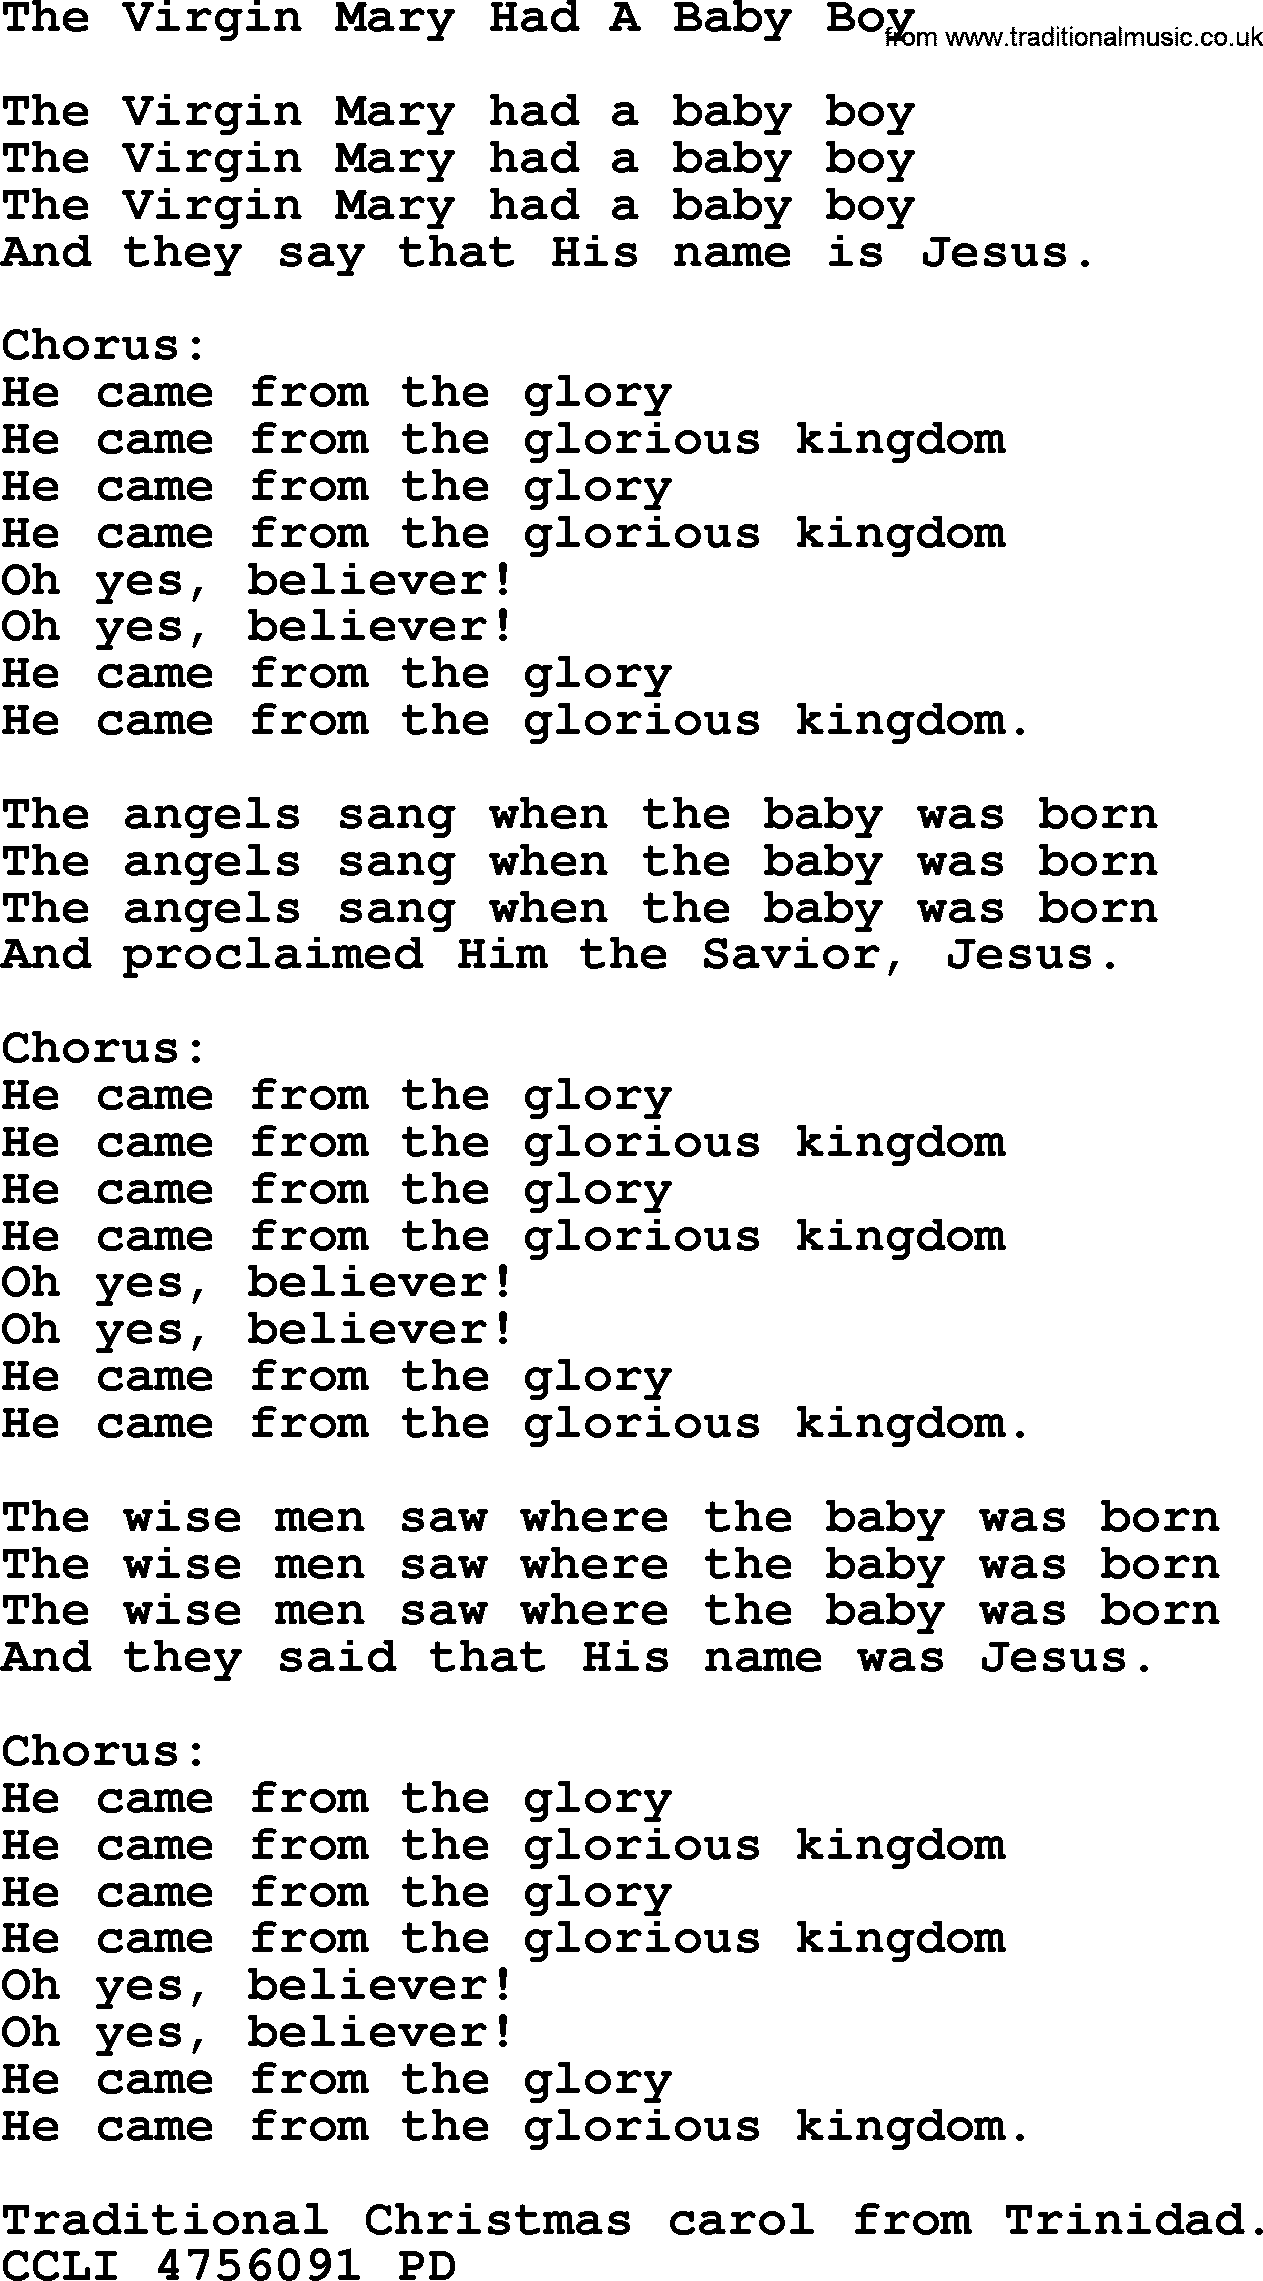 Christmas Powerpoints Song The Virgin Mary Had A Baby Boy Lyrics Ppt For Church Projection Etc And Pdf